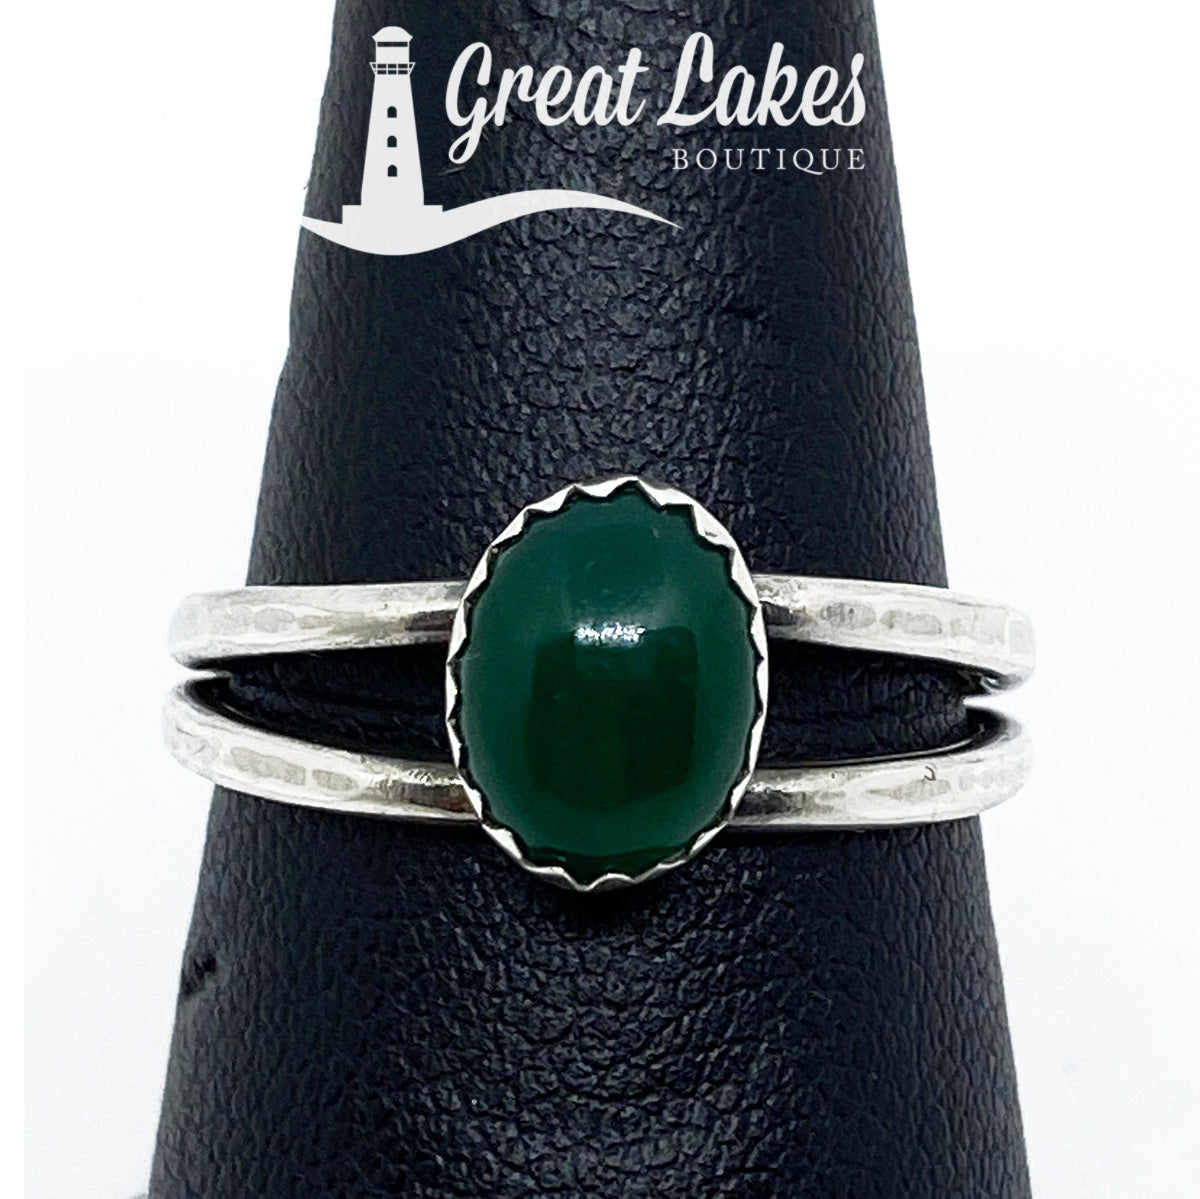 Great Lakes Boutique Silver &amp; Green Onyx Ring